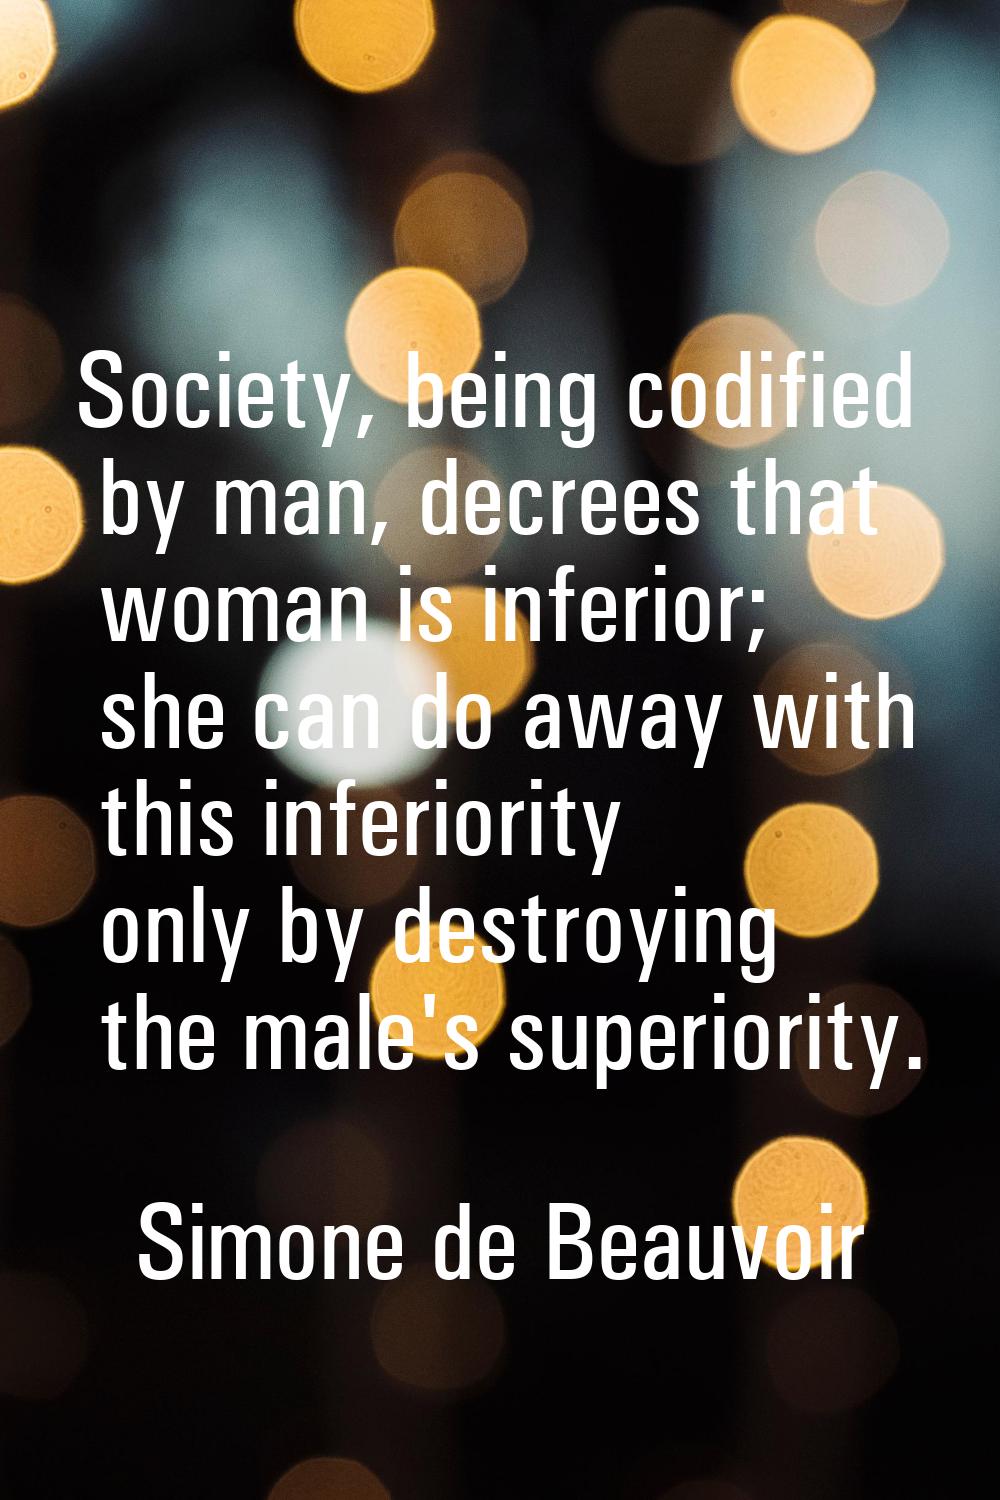 Society, being codified by man, decrees that woman is inferior; she can do away with this inferiori